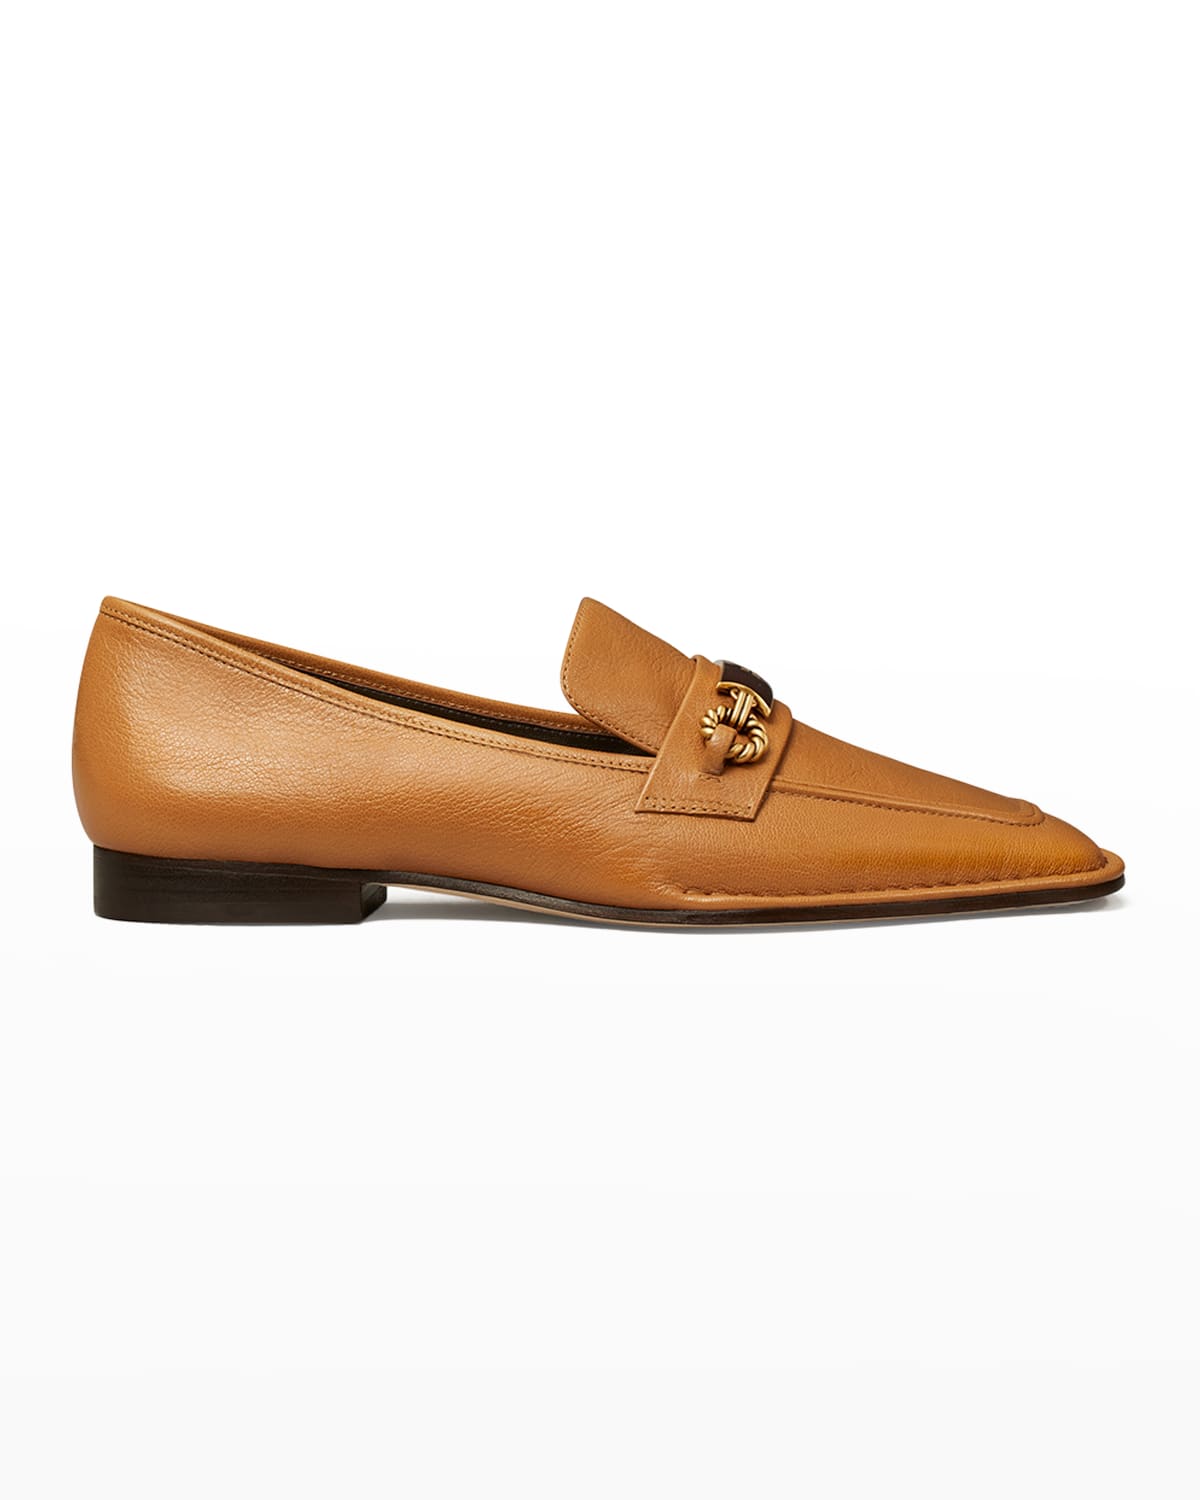 TORY BURCH PERRINE LEATHER MEDALLION CHAIN LOAFERS